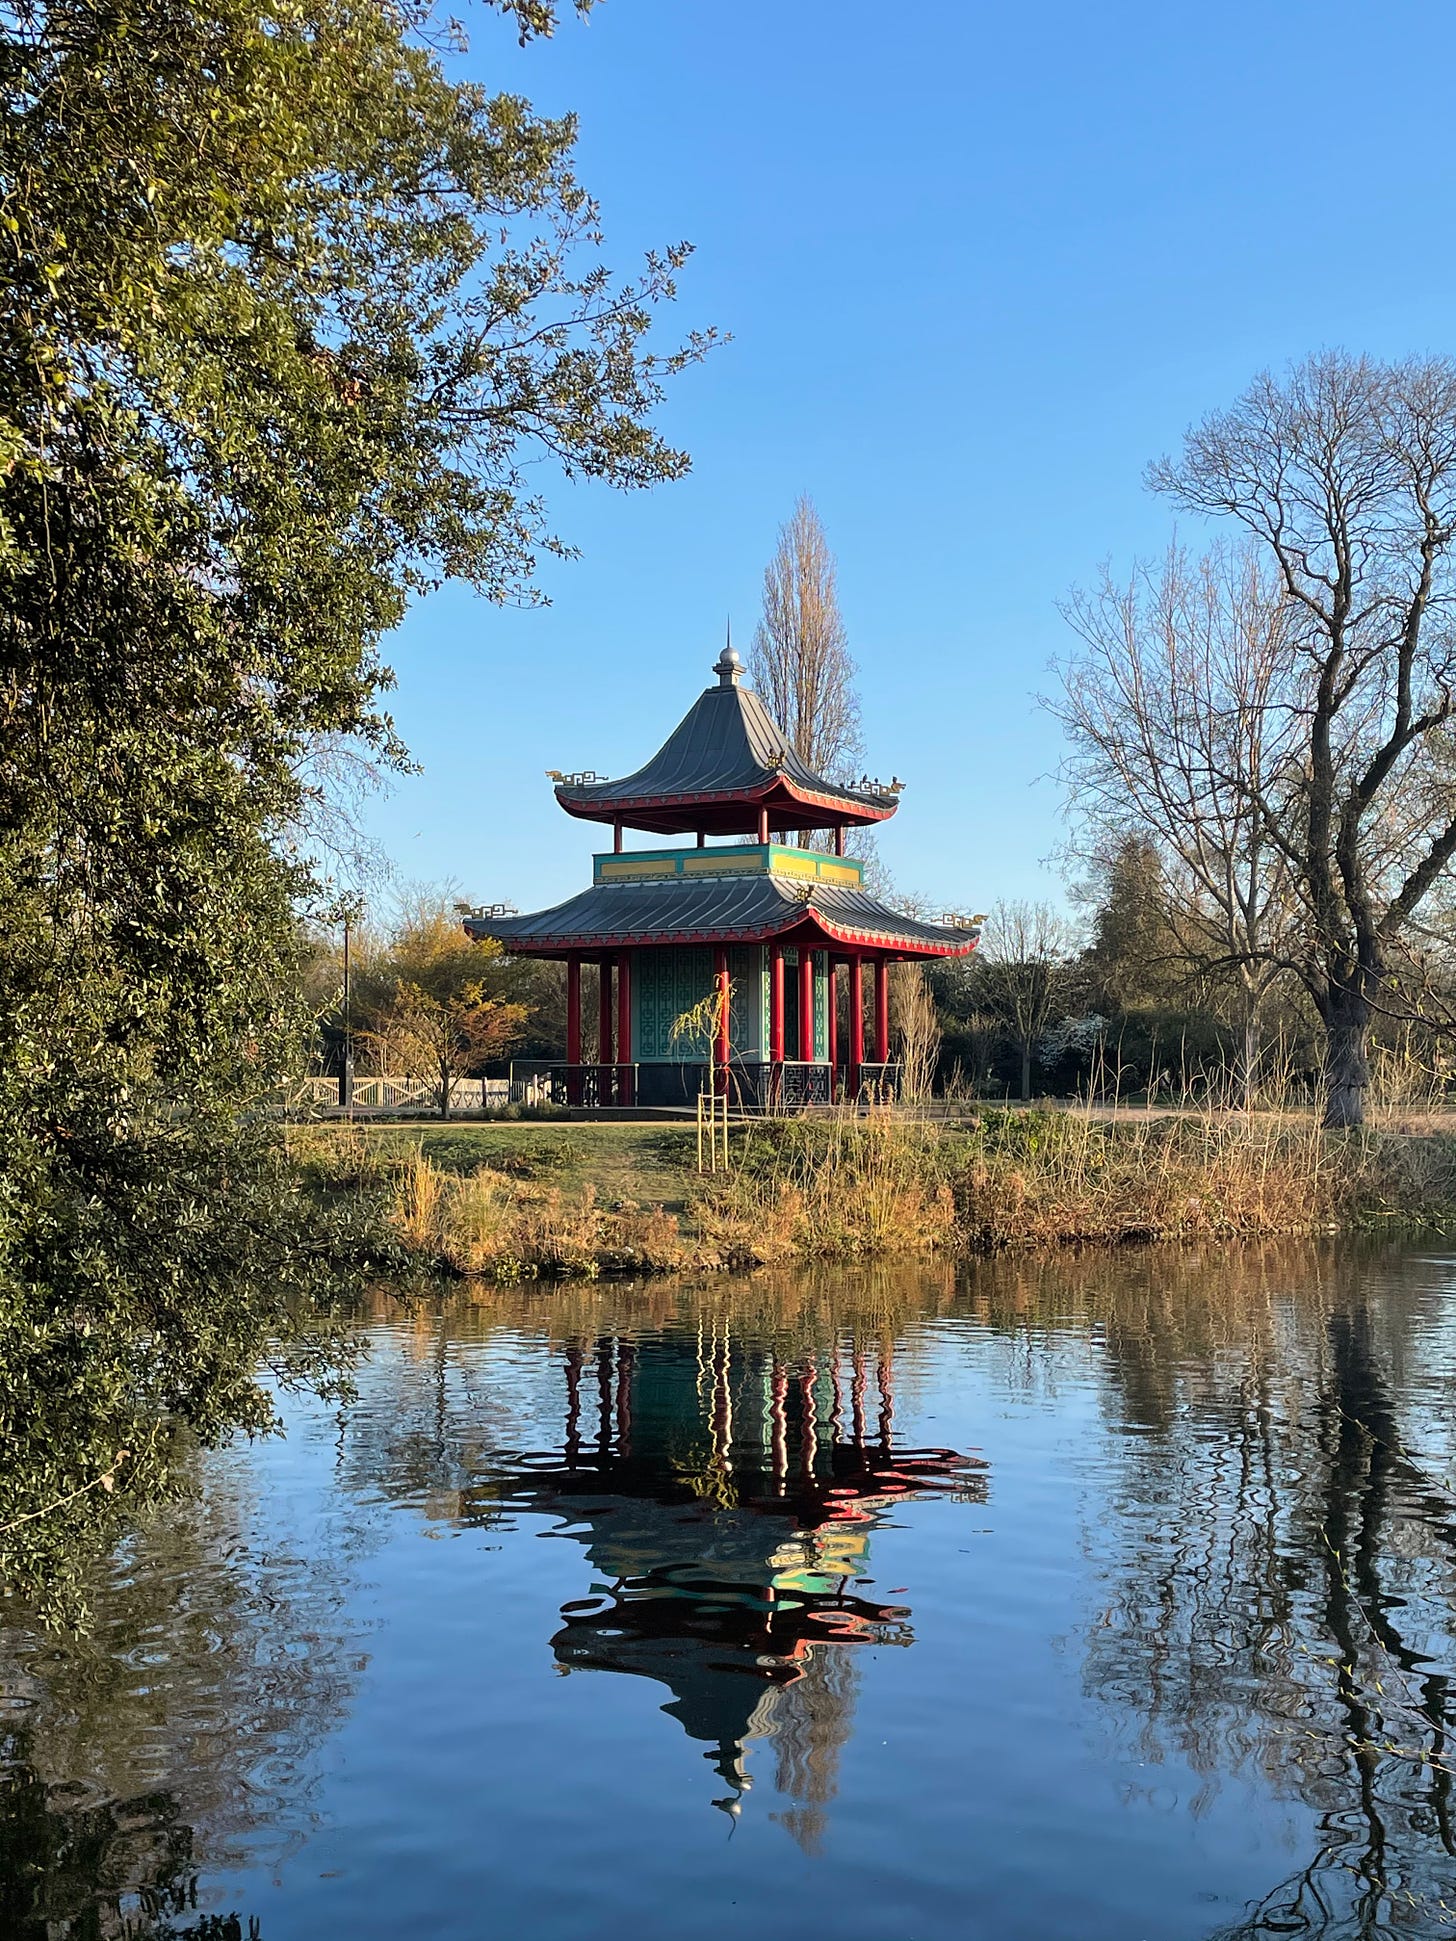 The Chinese Pagoda, Victoria Park, east London reflected in the water